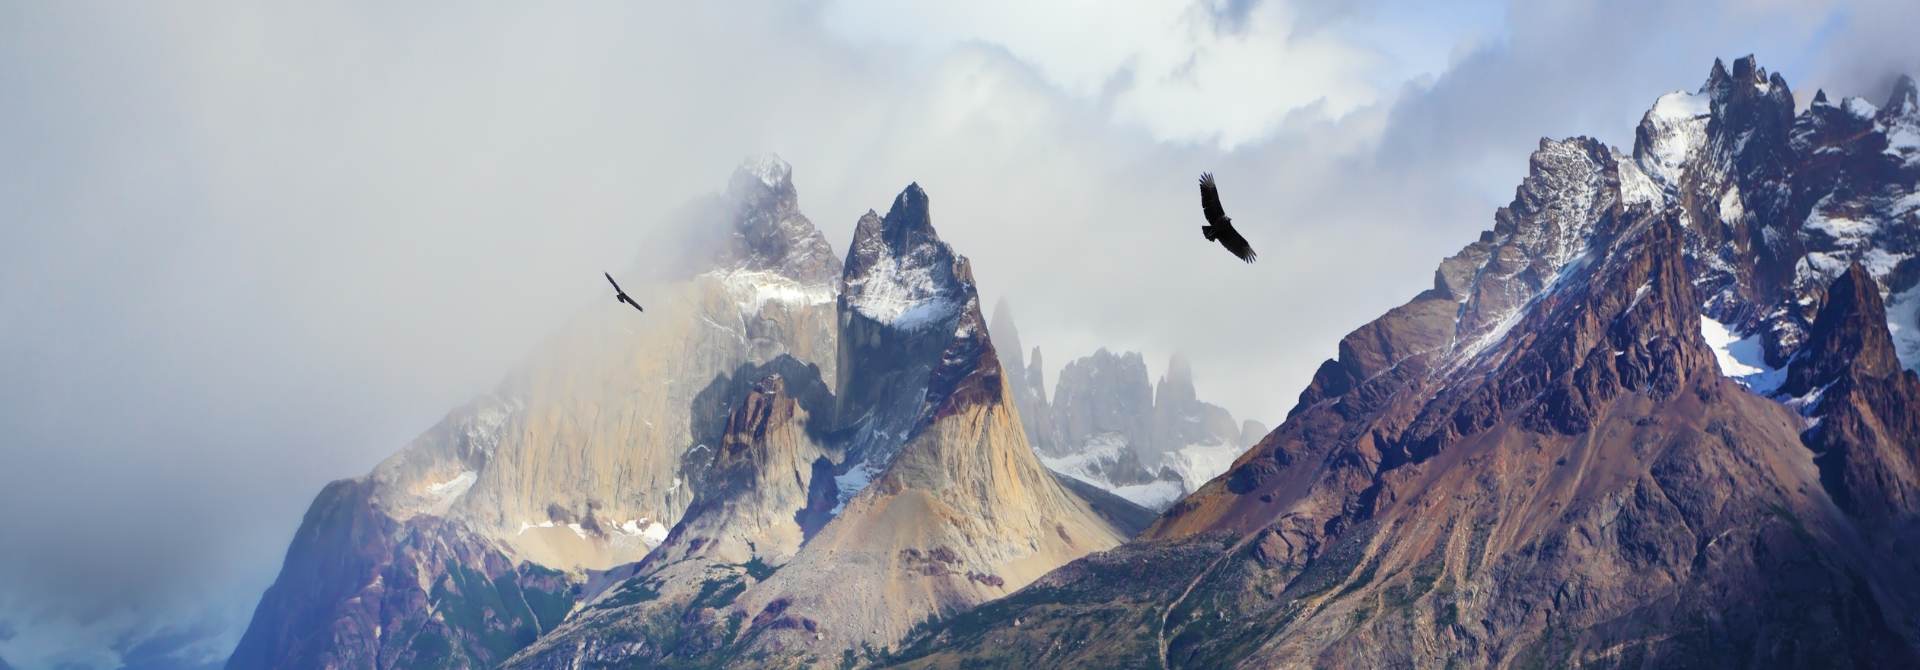 Condors flying over the Andes Mountains